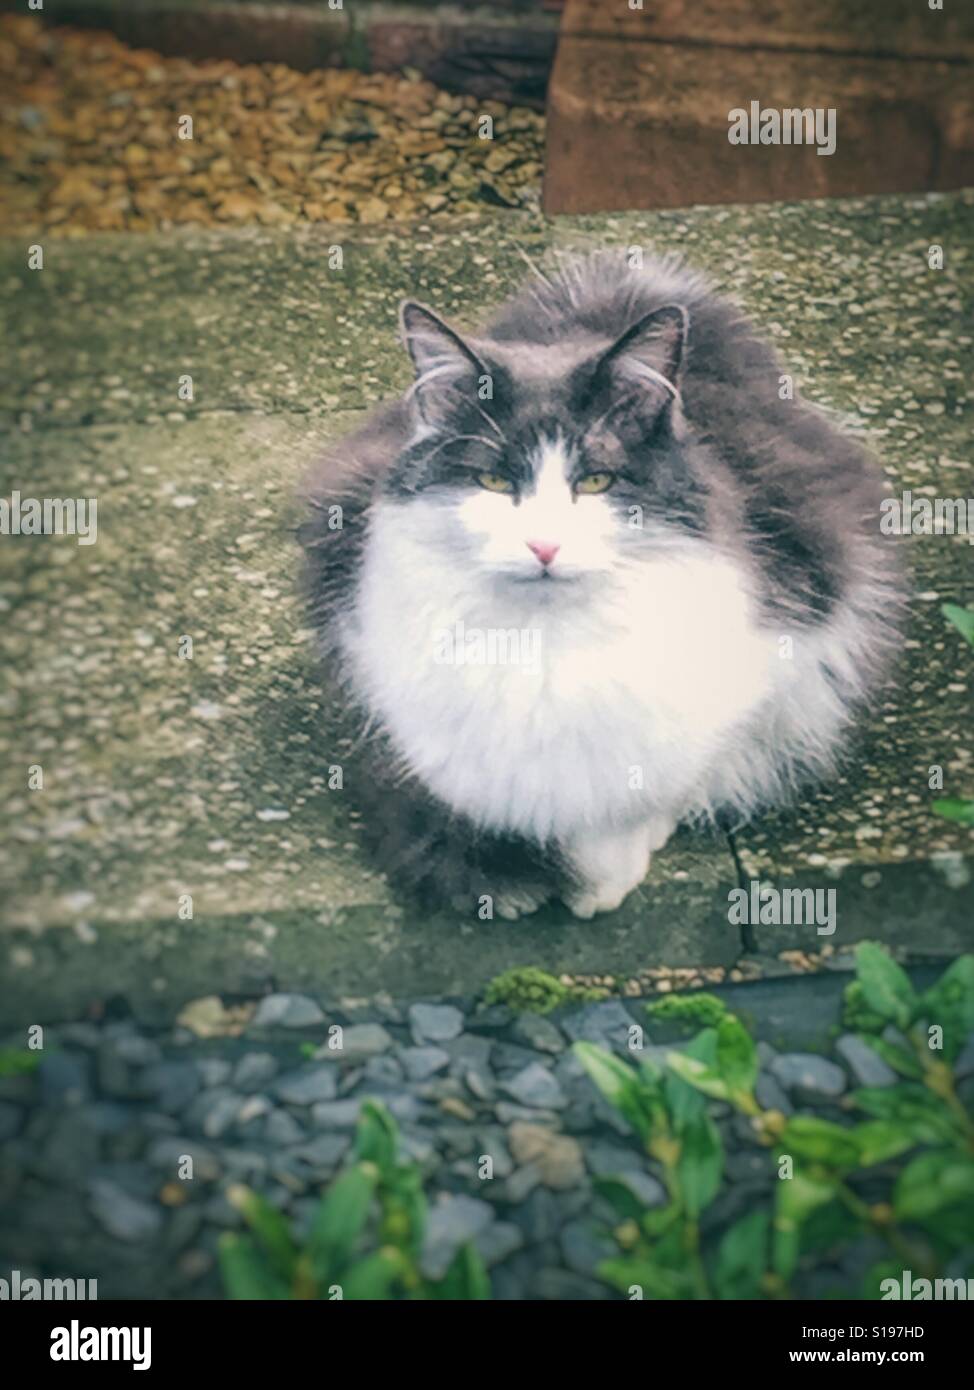 Fat, grey and white fluffy cat Stock Photo